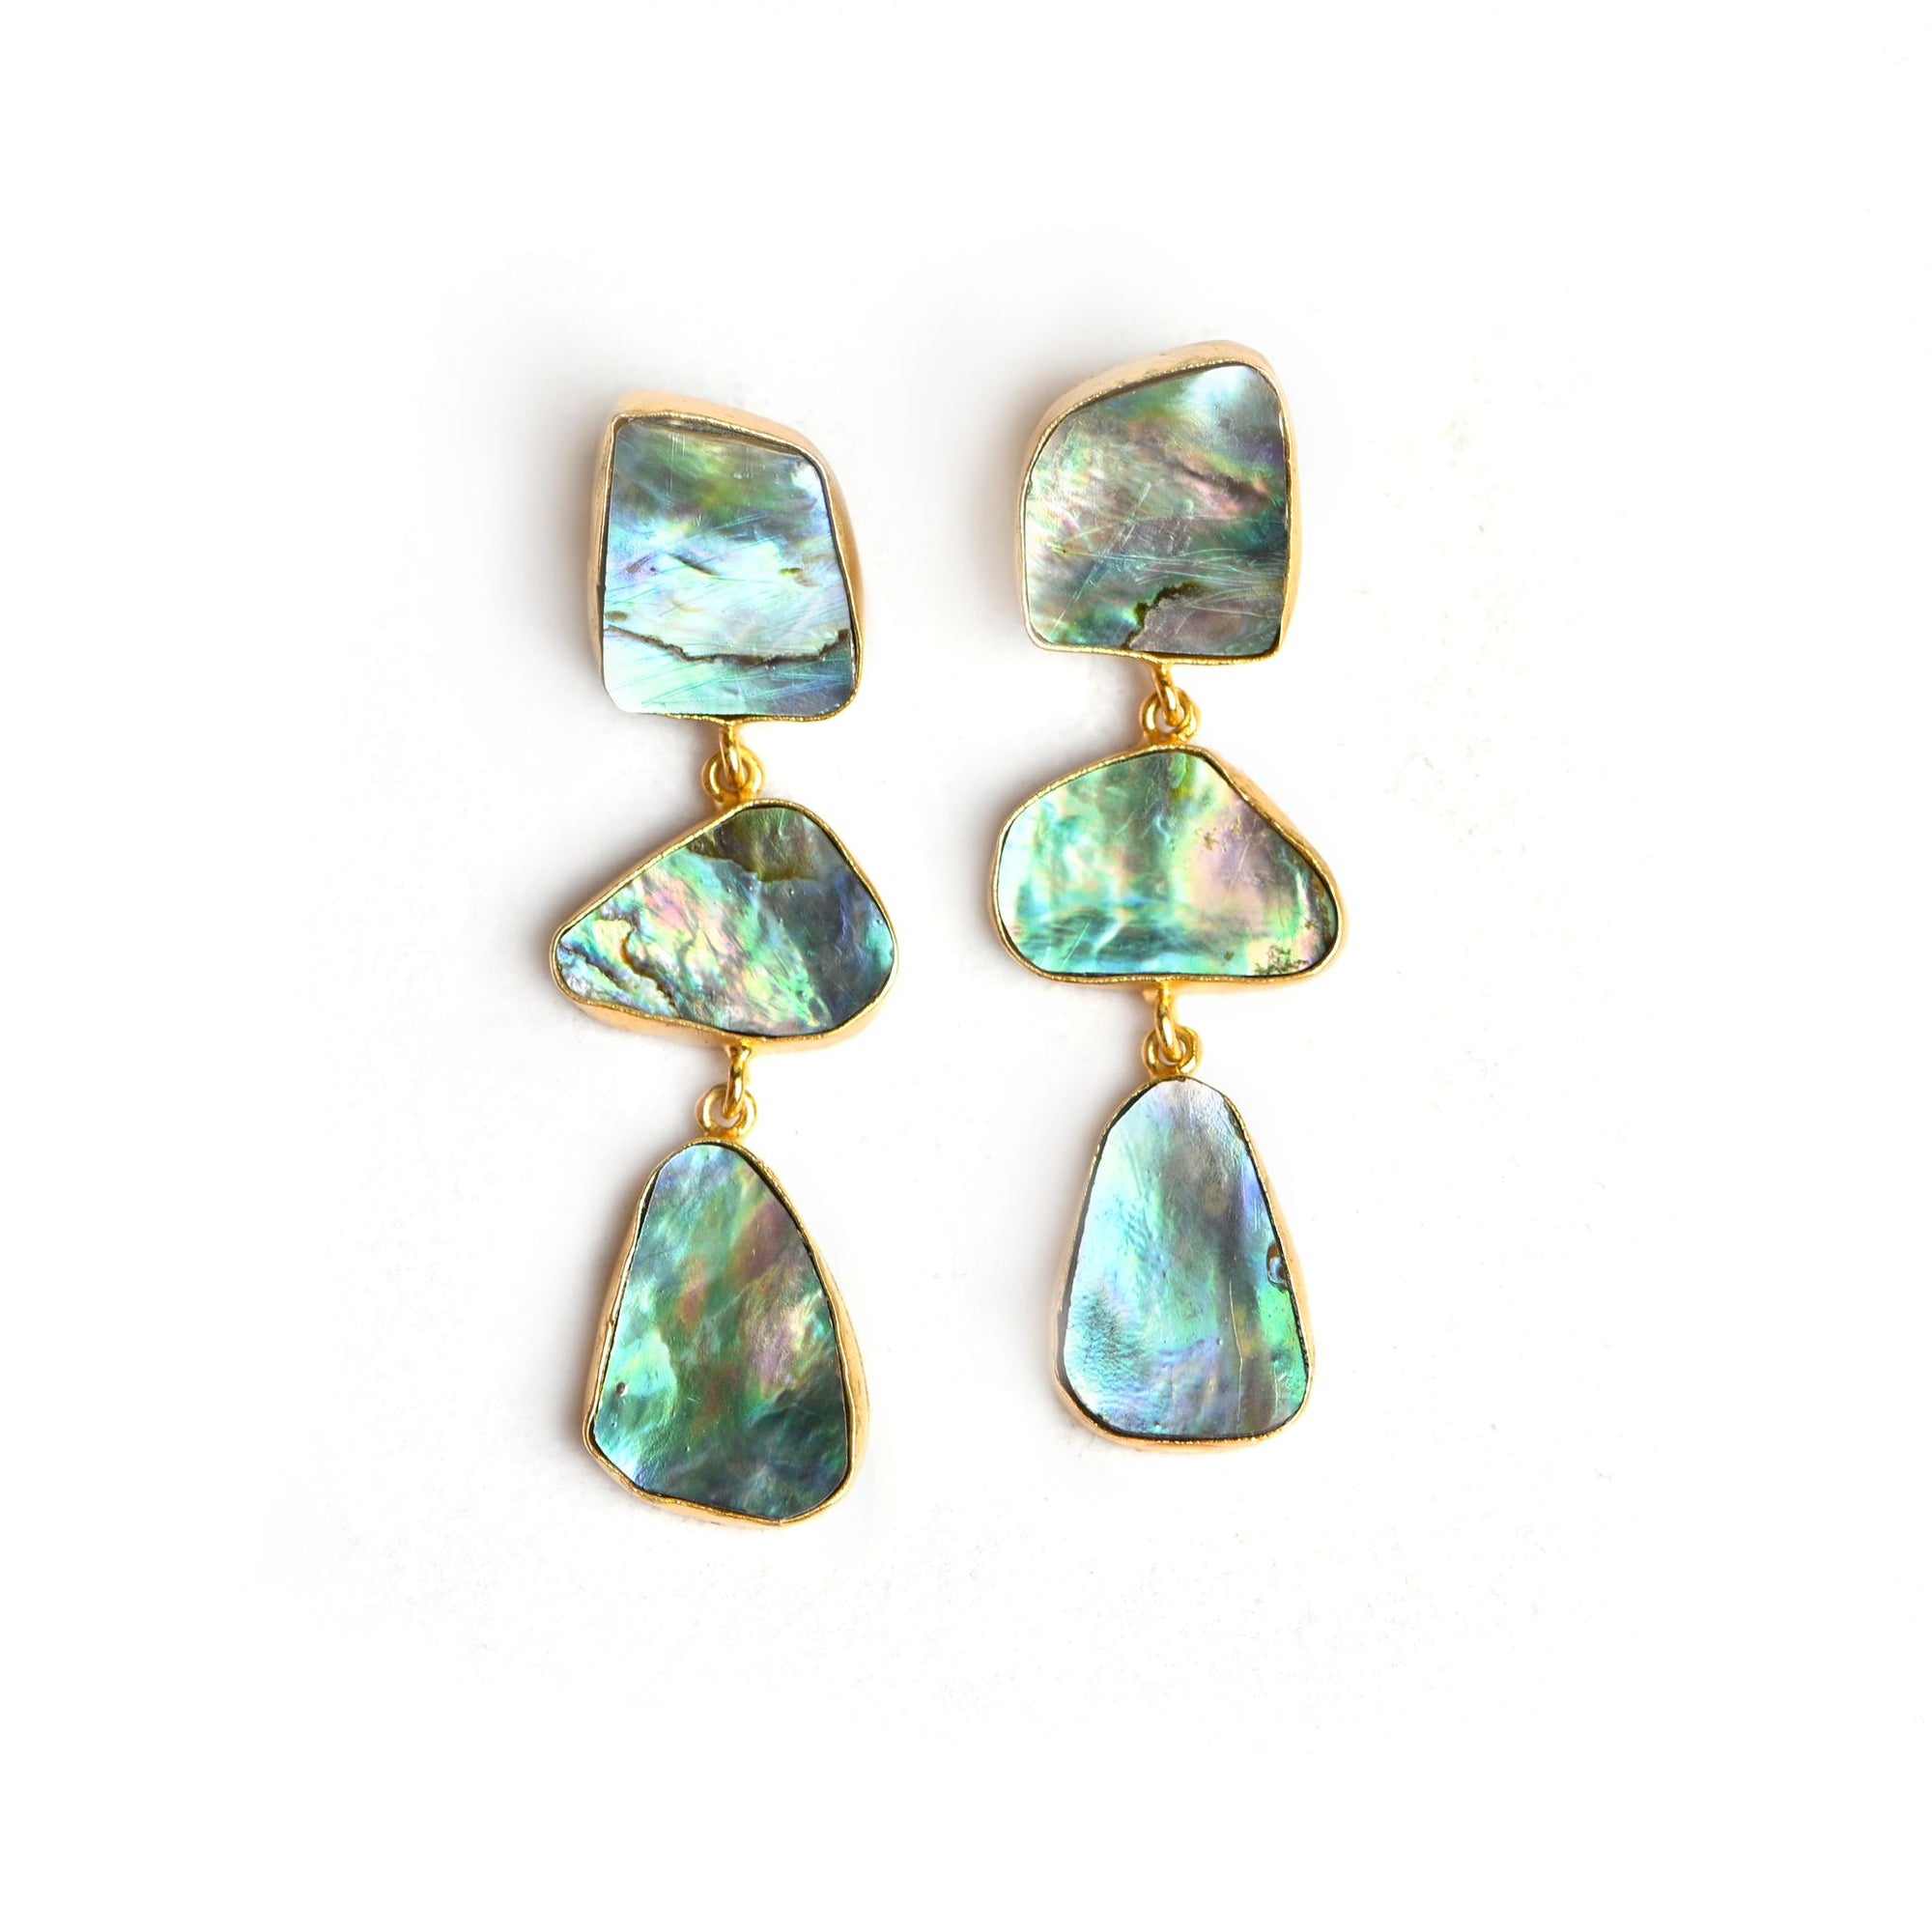 Pava (Abalone Shell) Statement Earrings